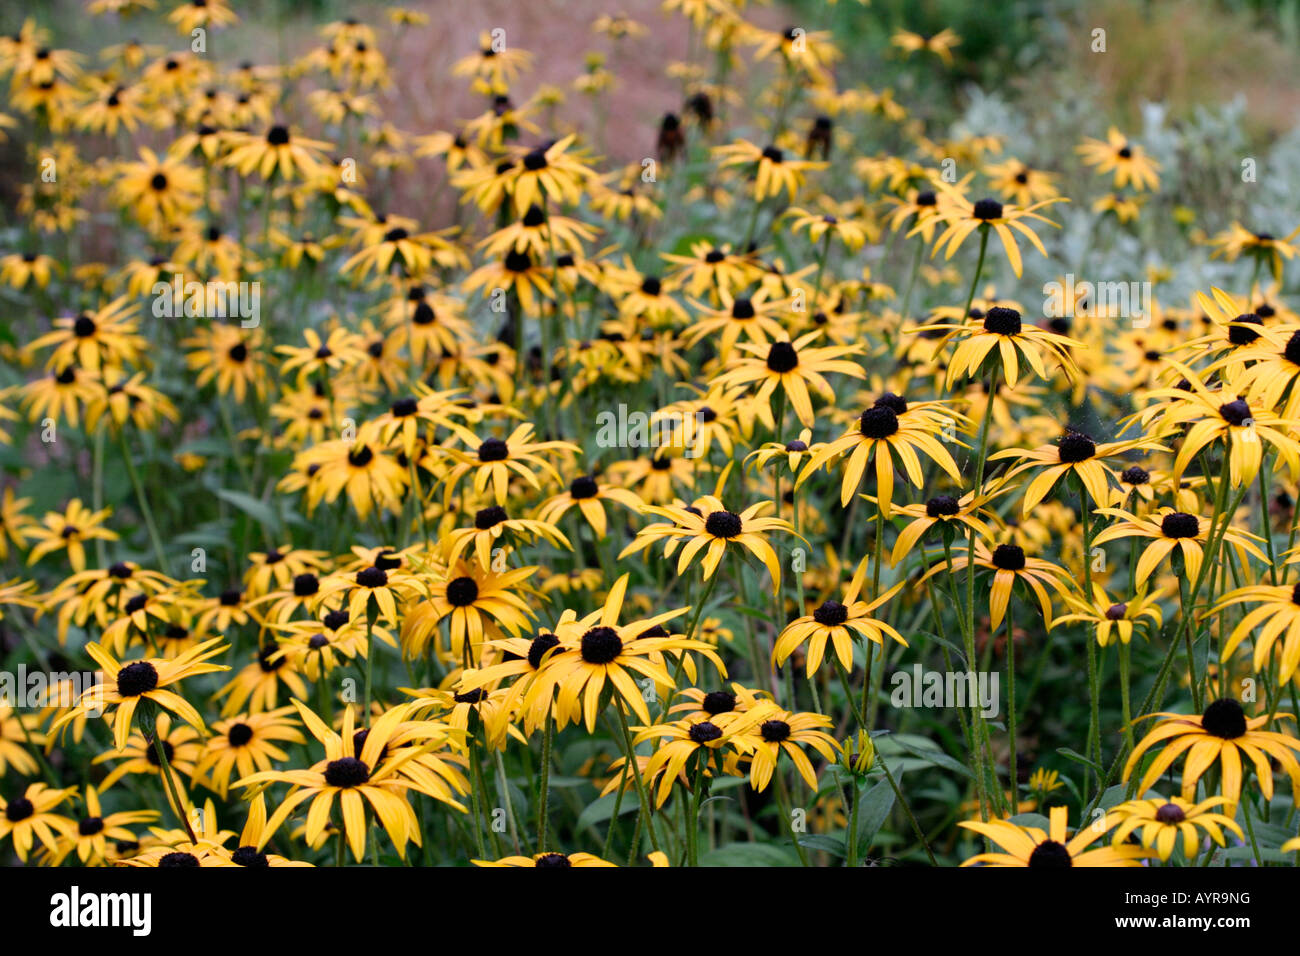 RUDBECKIA FULGIDA DEAMII PROVIDES MANY MONTHS OF INTEREST SHOWN HERE AT HOLBROOK GARDEN DEVON IN EARLY OCTOBER Stock Photo